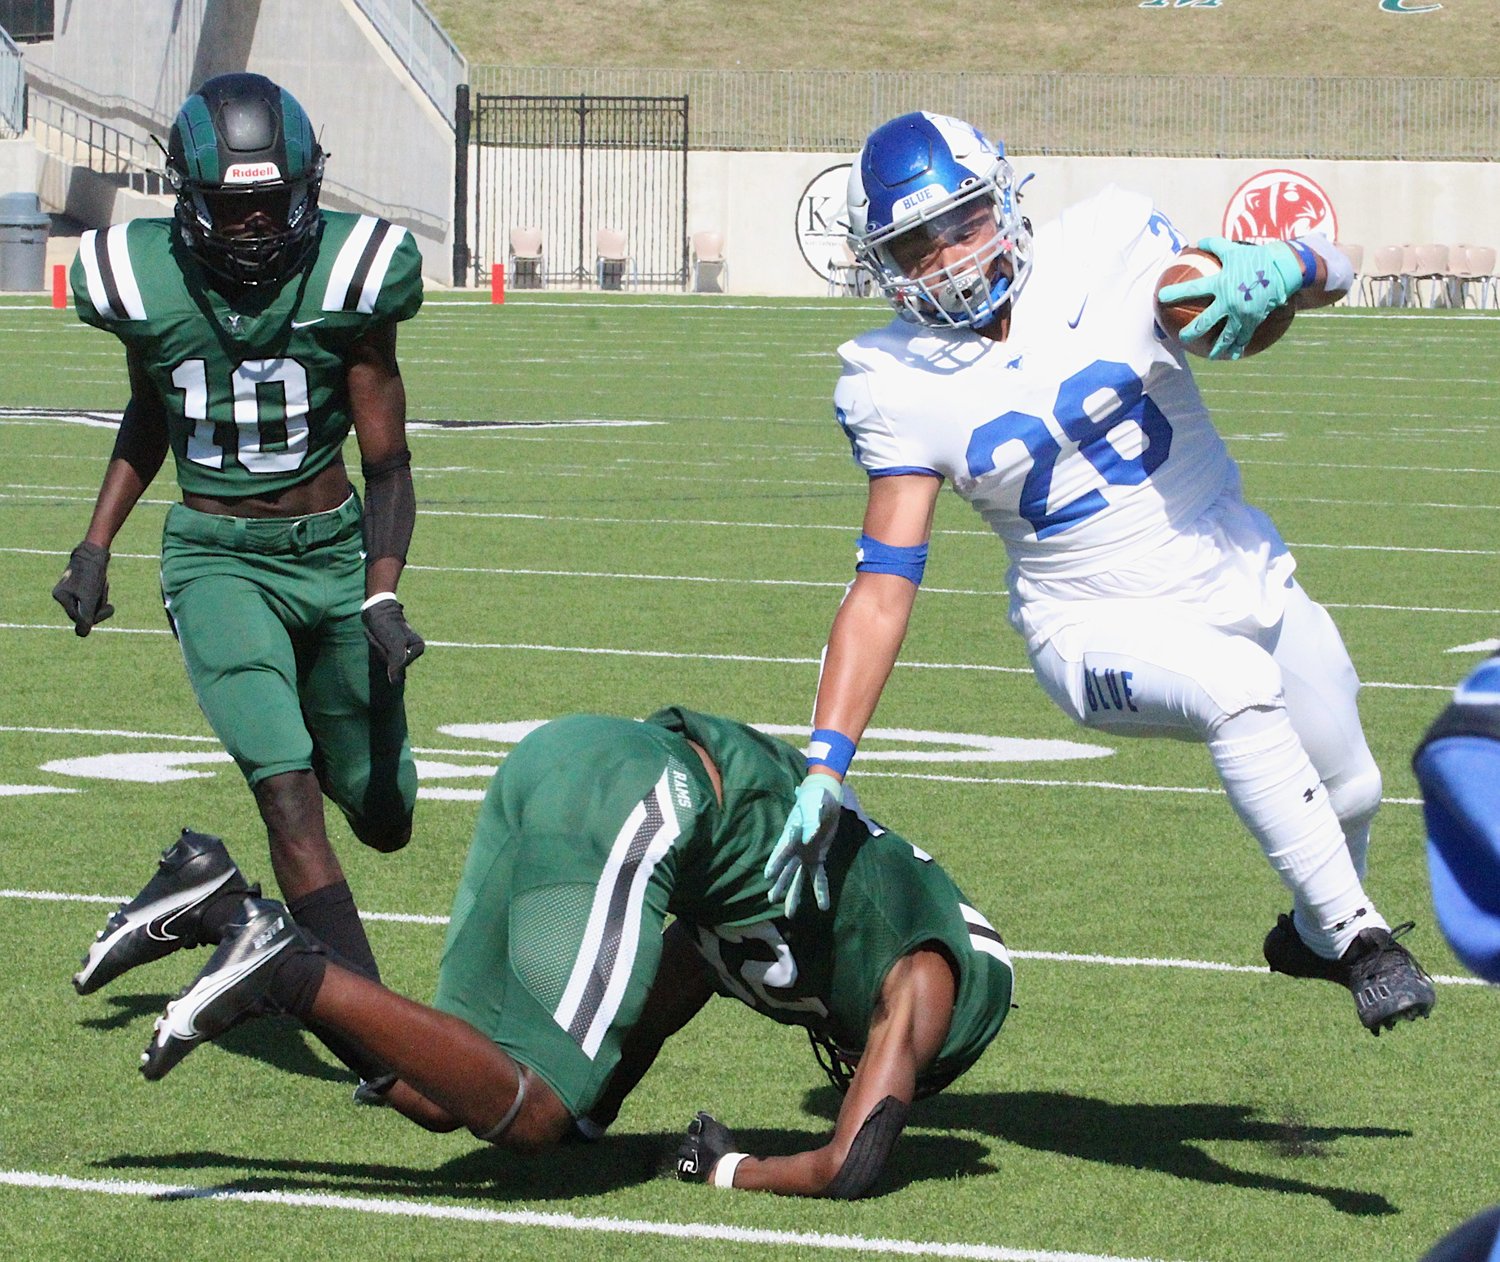 Taylor junior running back Tyler Irving carries the ball during Saturday's game against Mayde Creek at Legacy Stadium.